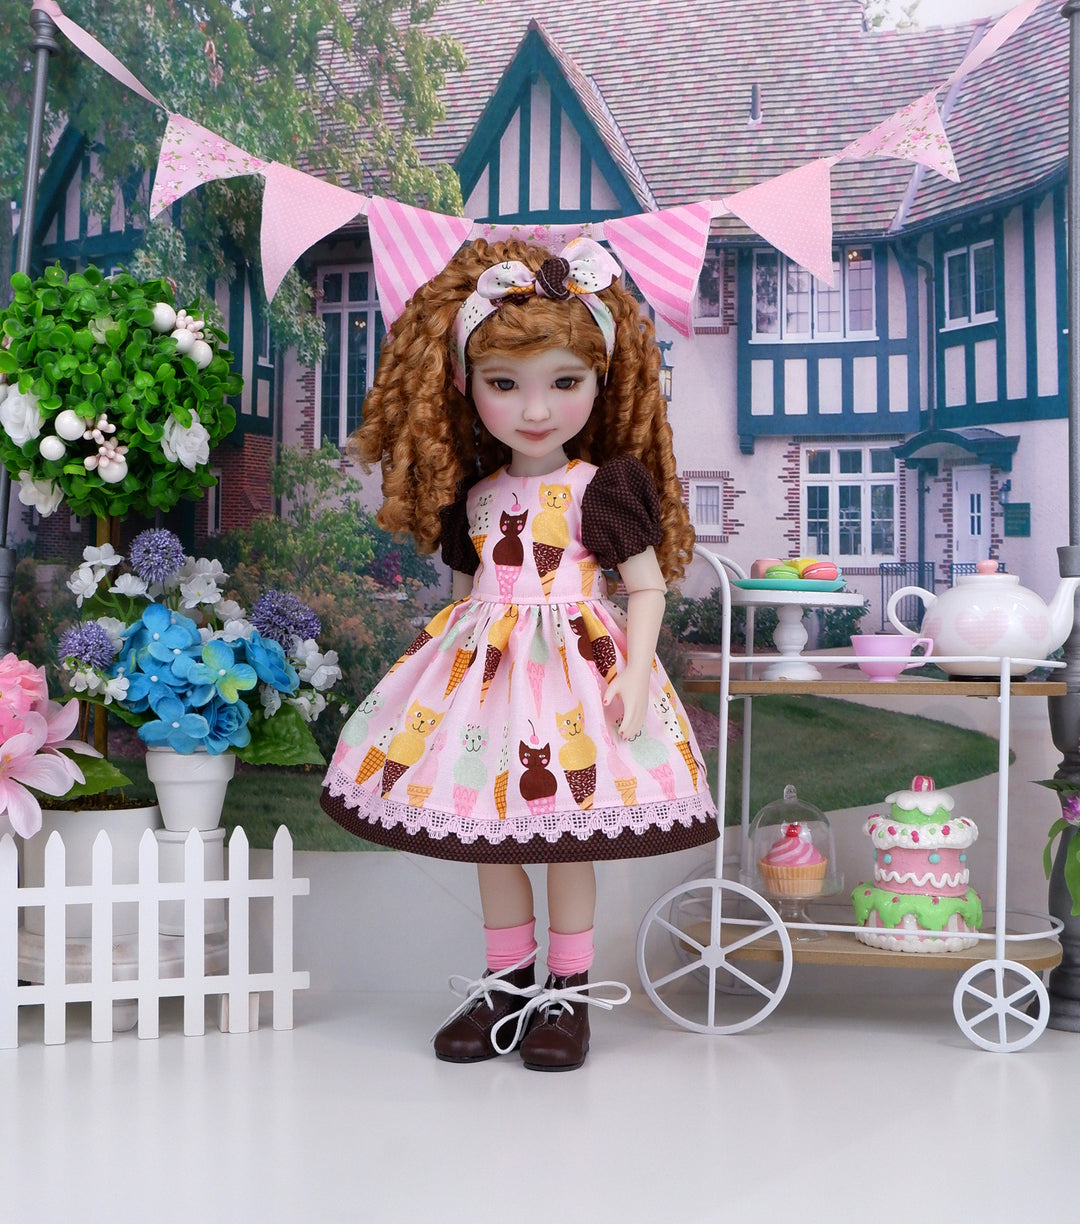 Kitty Sundae - dress and boots for Ruby Red Fashion Friends doll